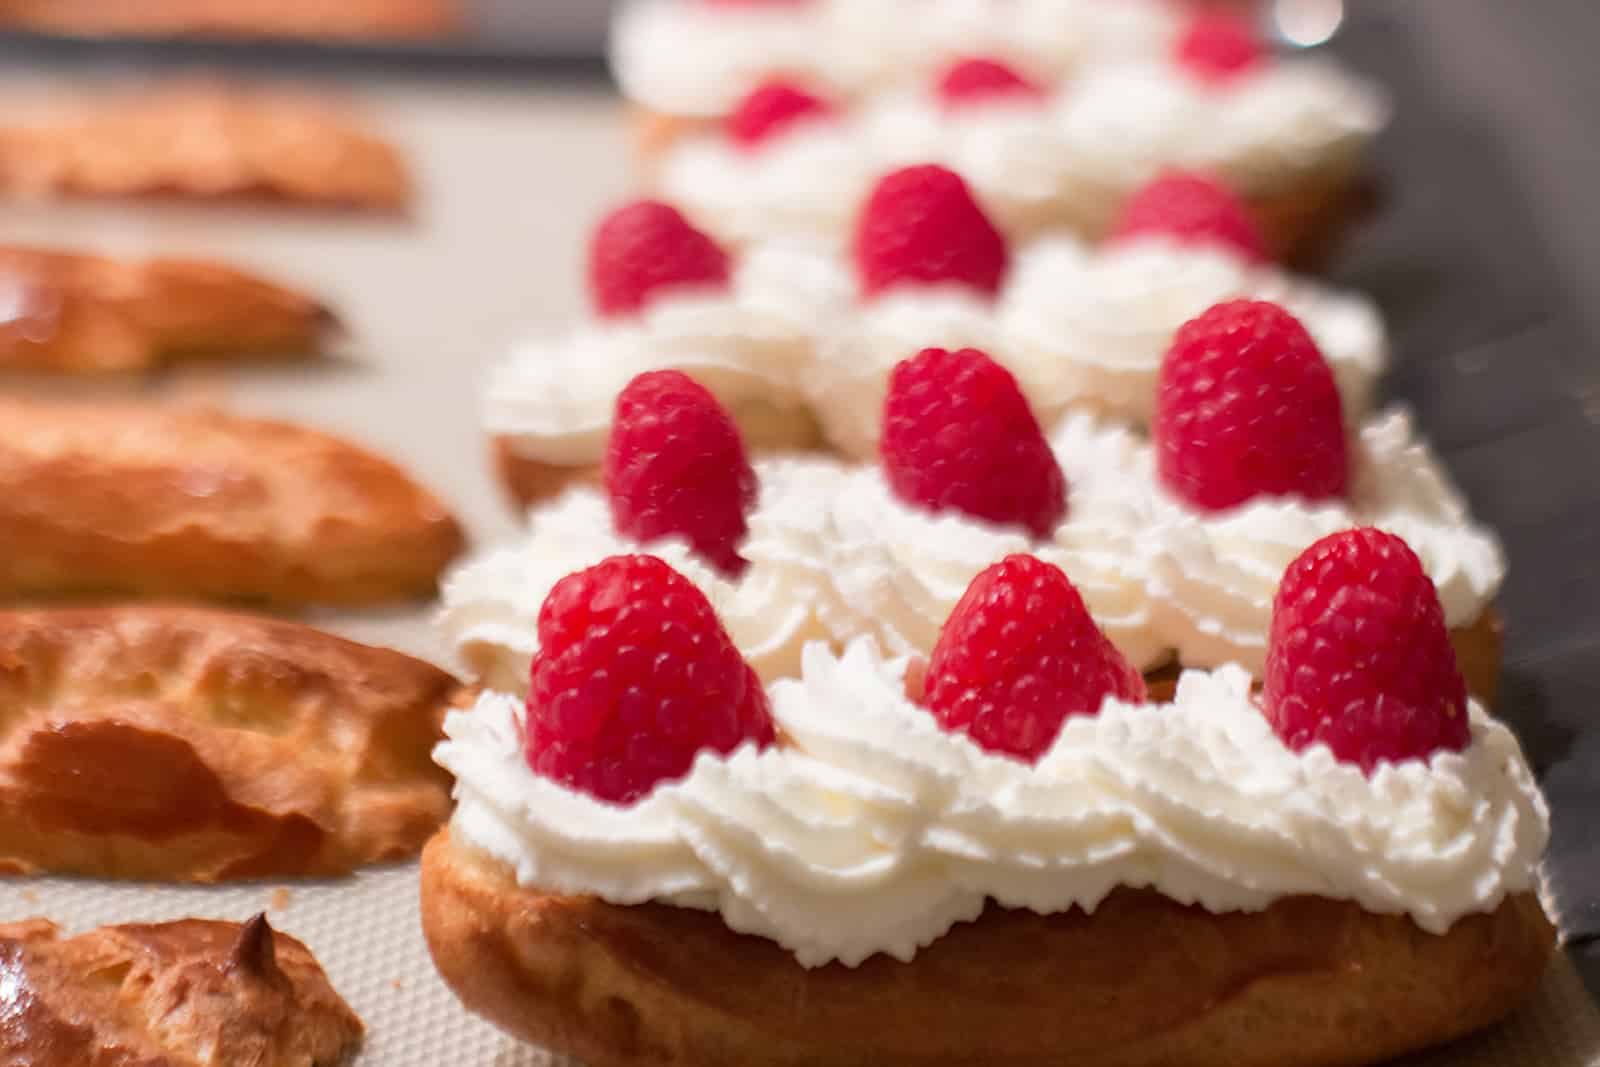 The Five Best Apps for Food-Lovers in Paris will help you find great local places to eat, drink and take baking classes like at La Cuisine, where you'll learn how to make these creamy desserts with raspberries on top.